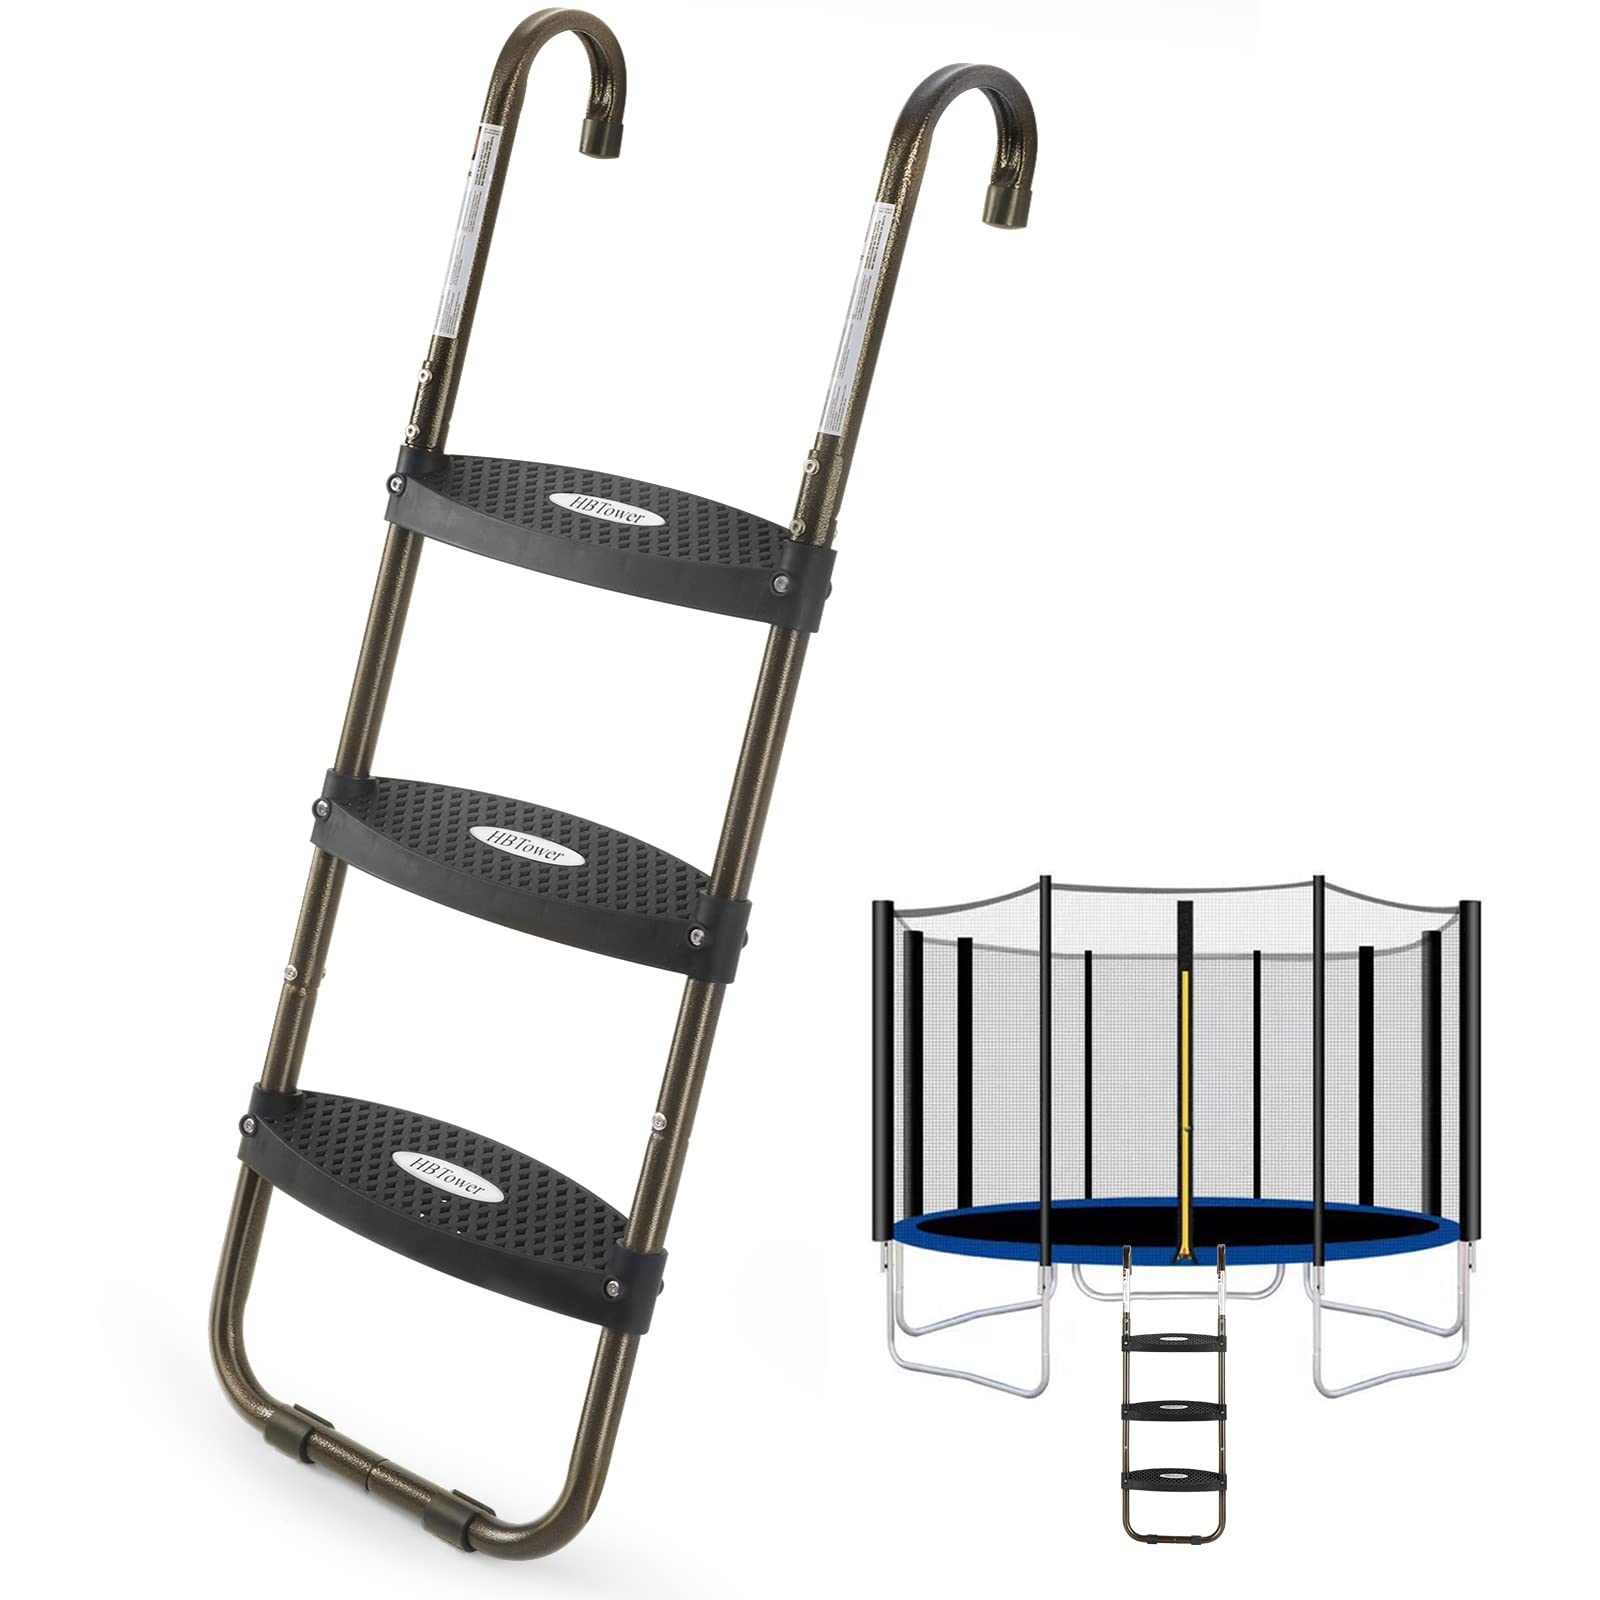 HBTower Trampoline Ladder with Horizontal and Wide Steps, Universal Hook, UV Treated Steel, 220 lbs Capacity Trampoline Accessories for Children Kids